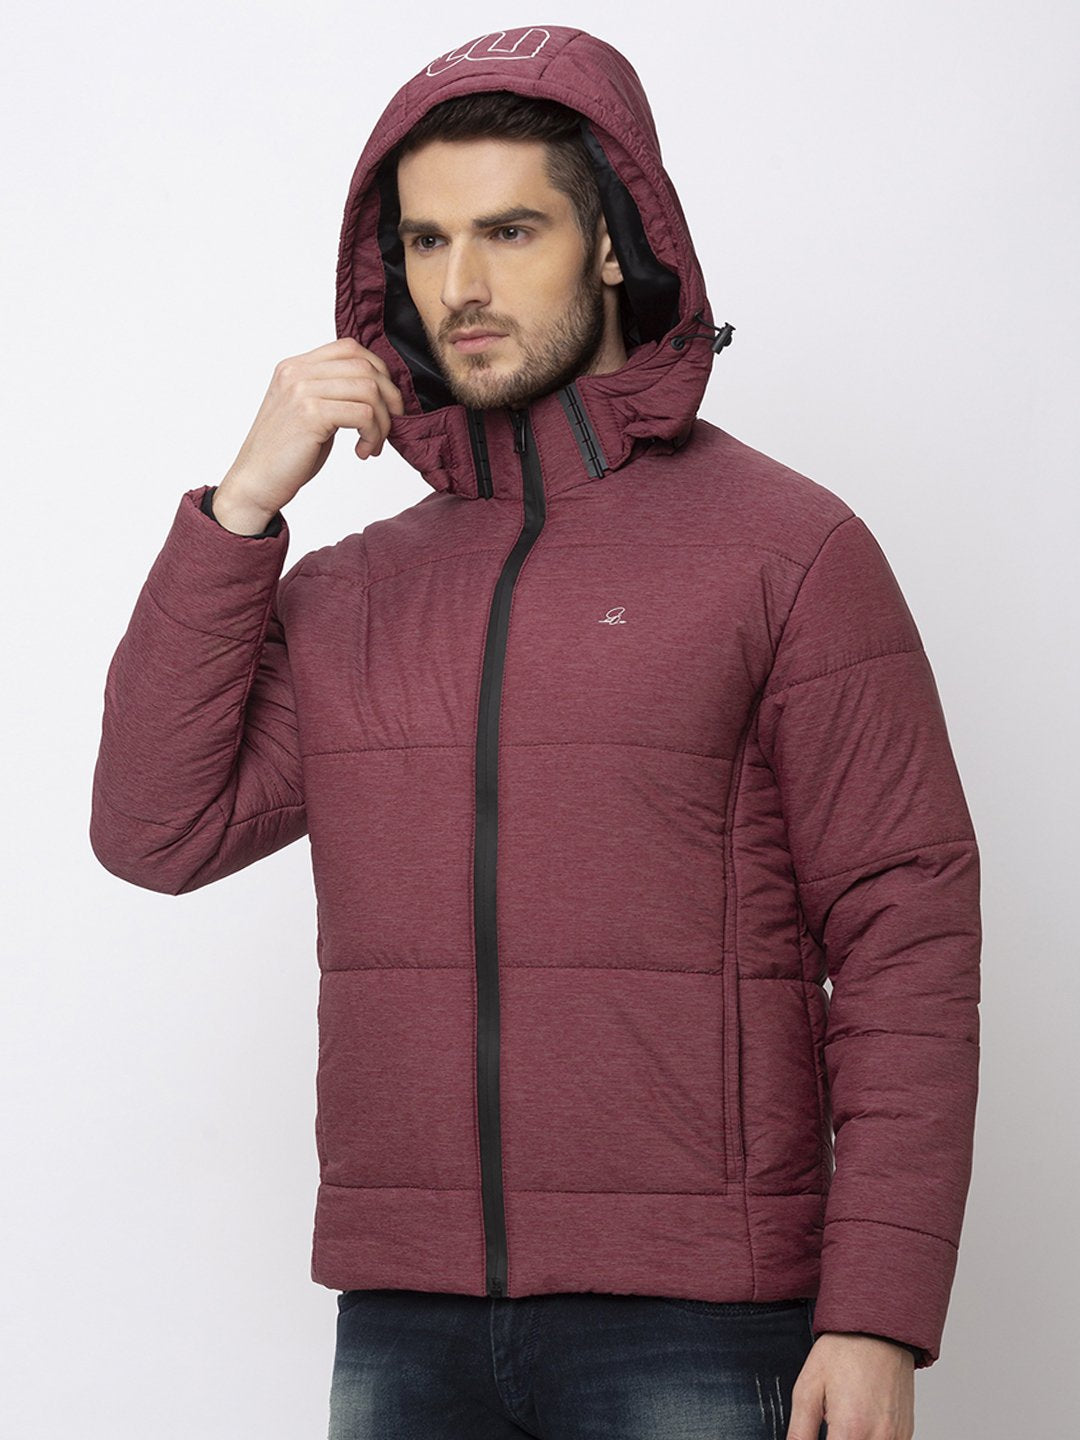 winter jackets for plus size